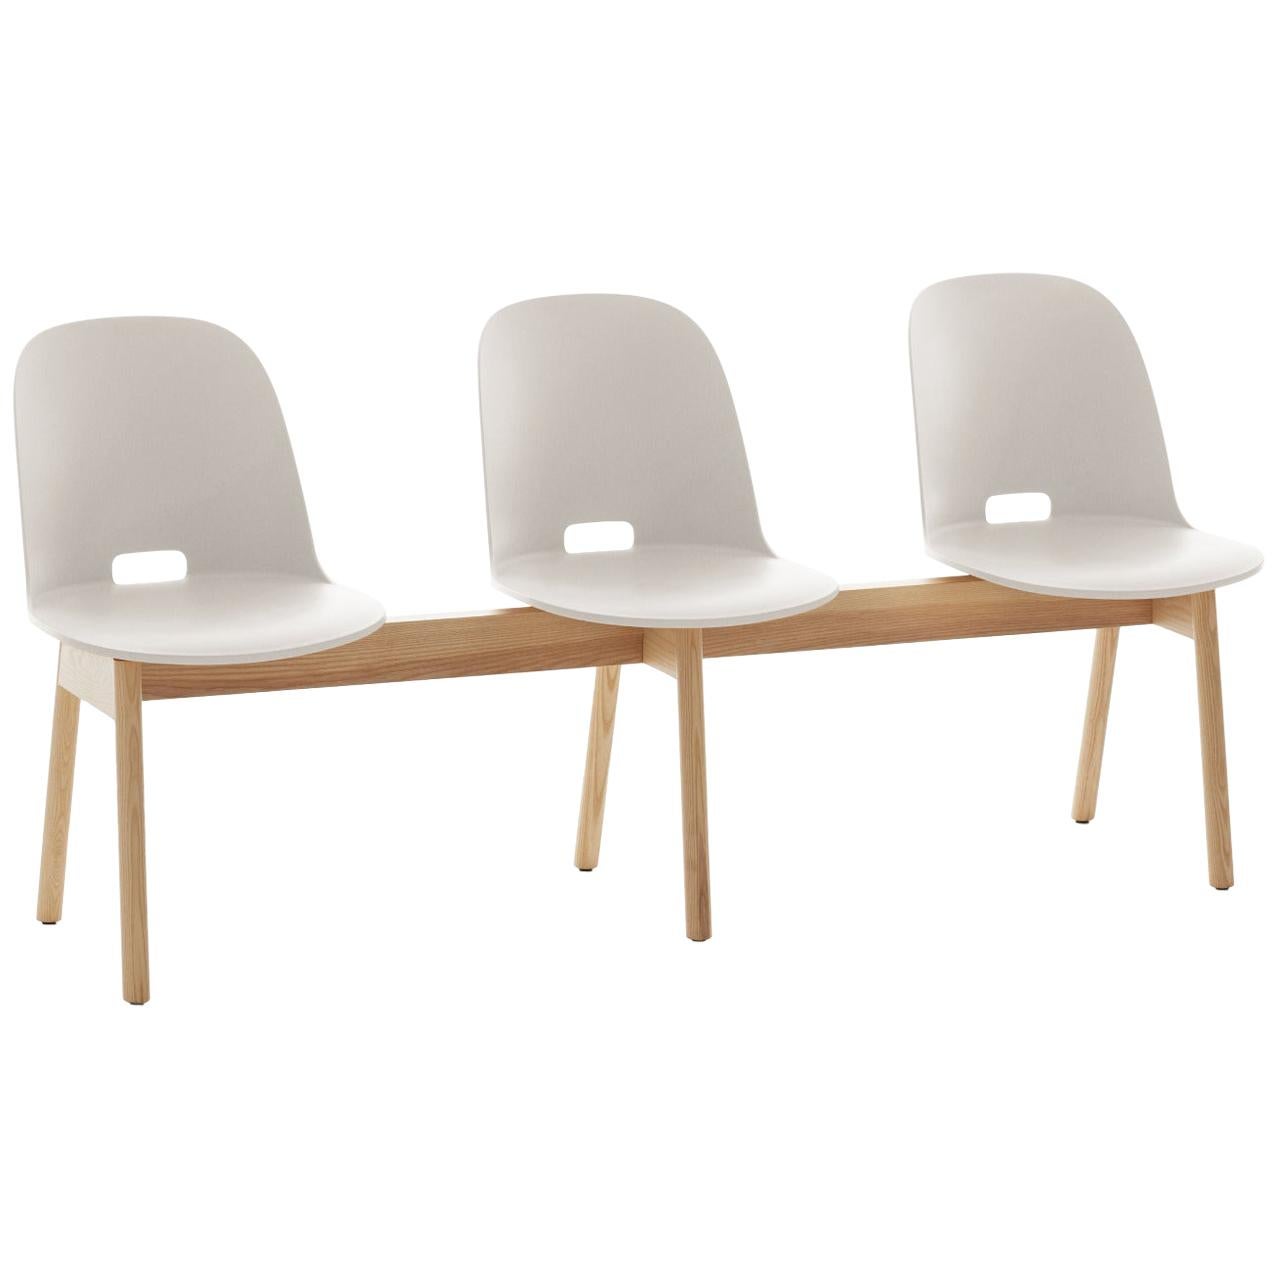 Emeco Alfi 3-Seat Bench in White and Ash with High Back by Jasper Morrison